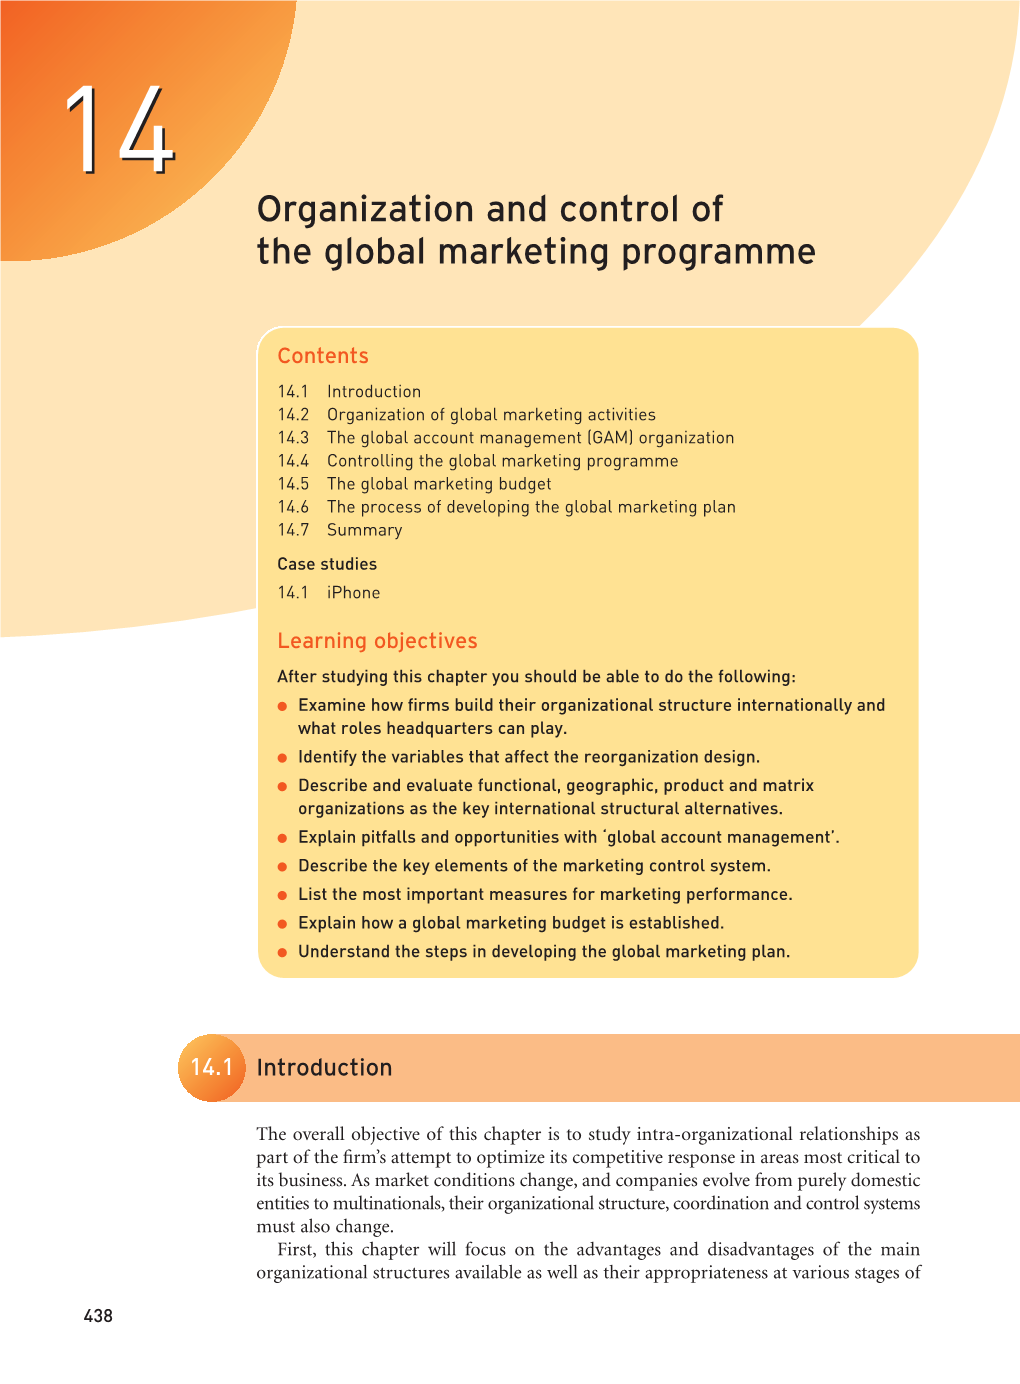 Organization and Control of the Global Marketing Programme